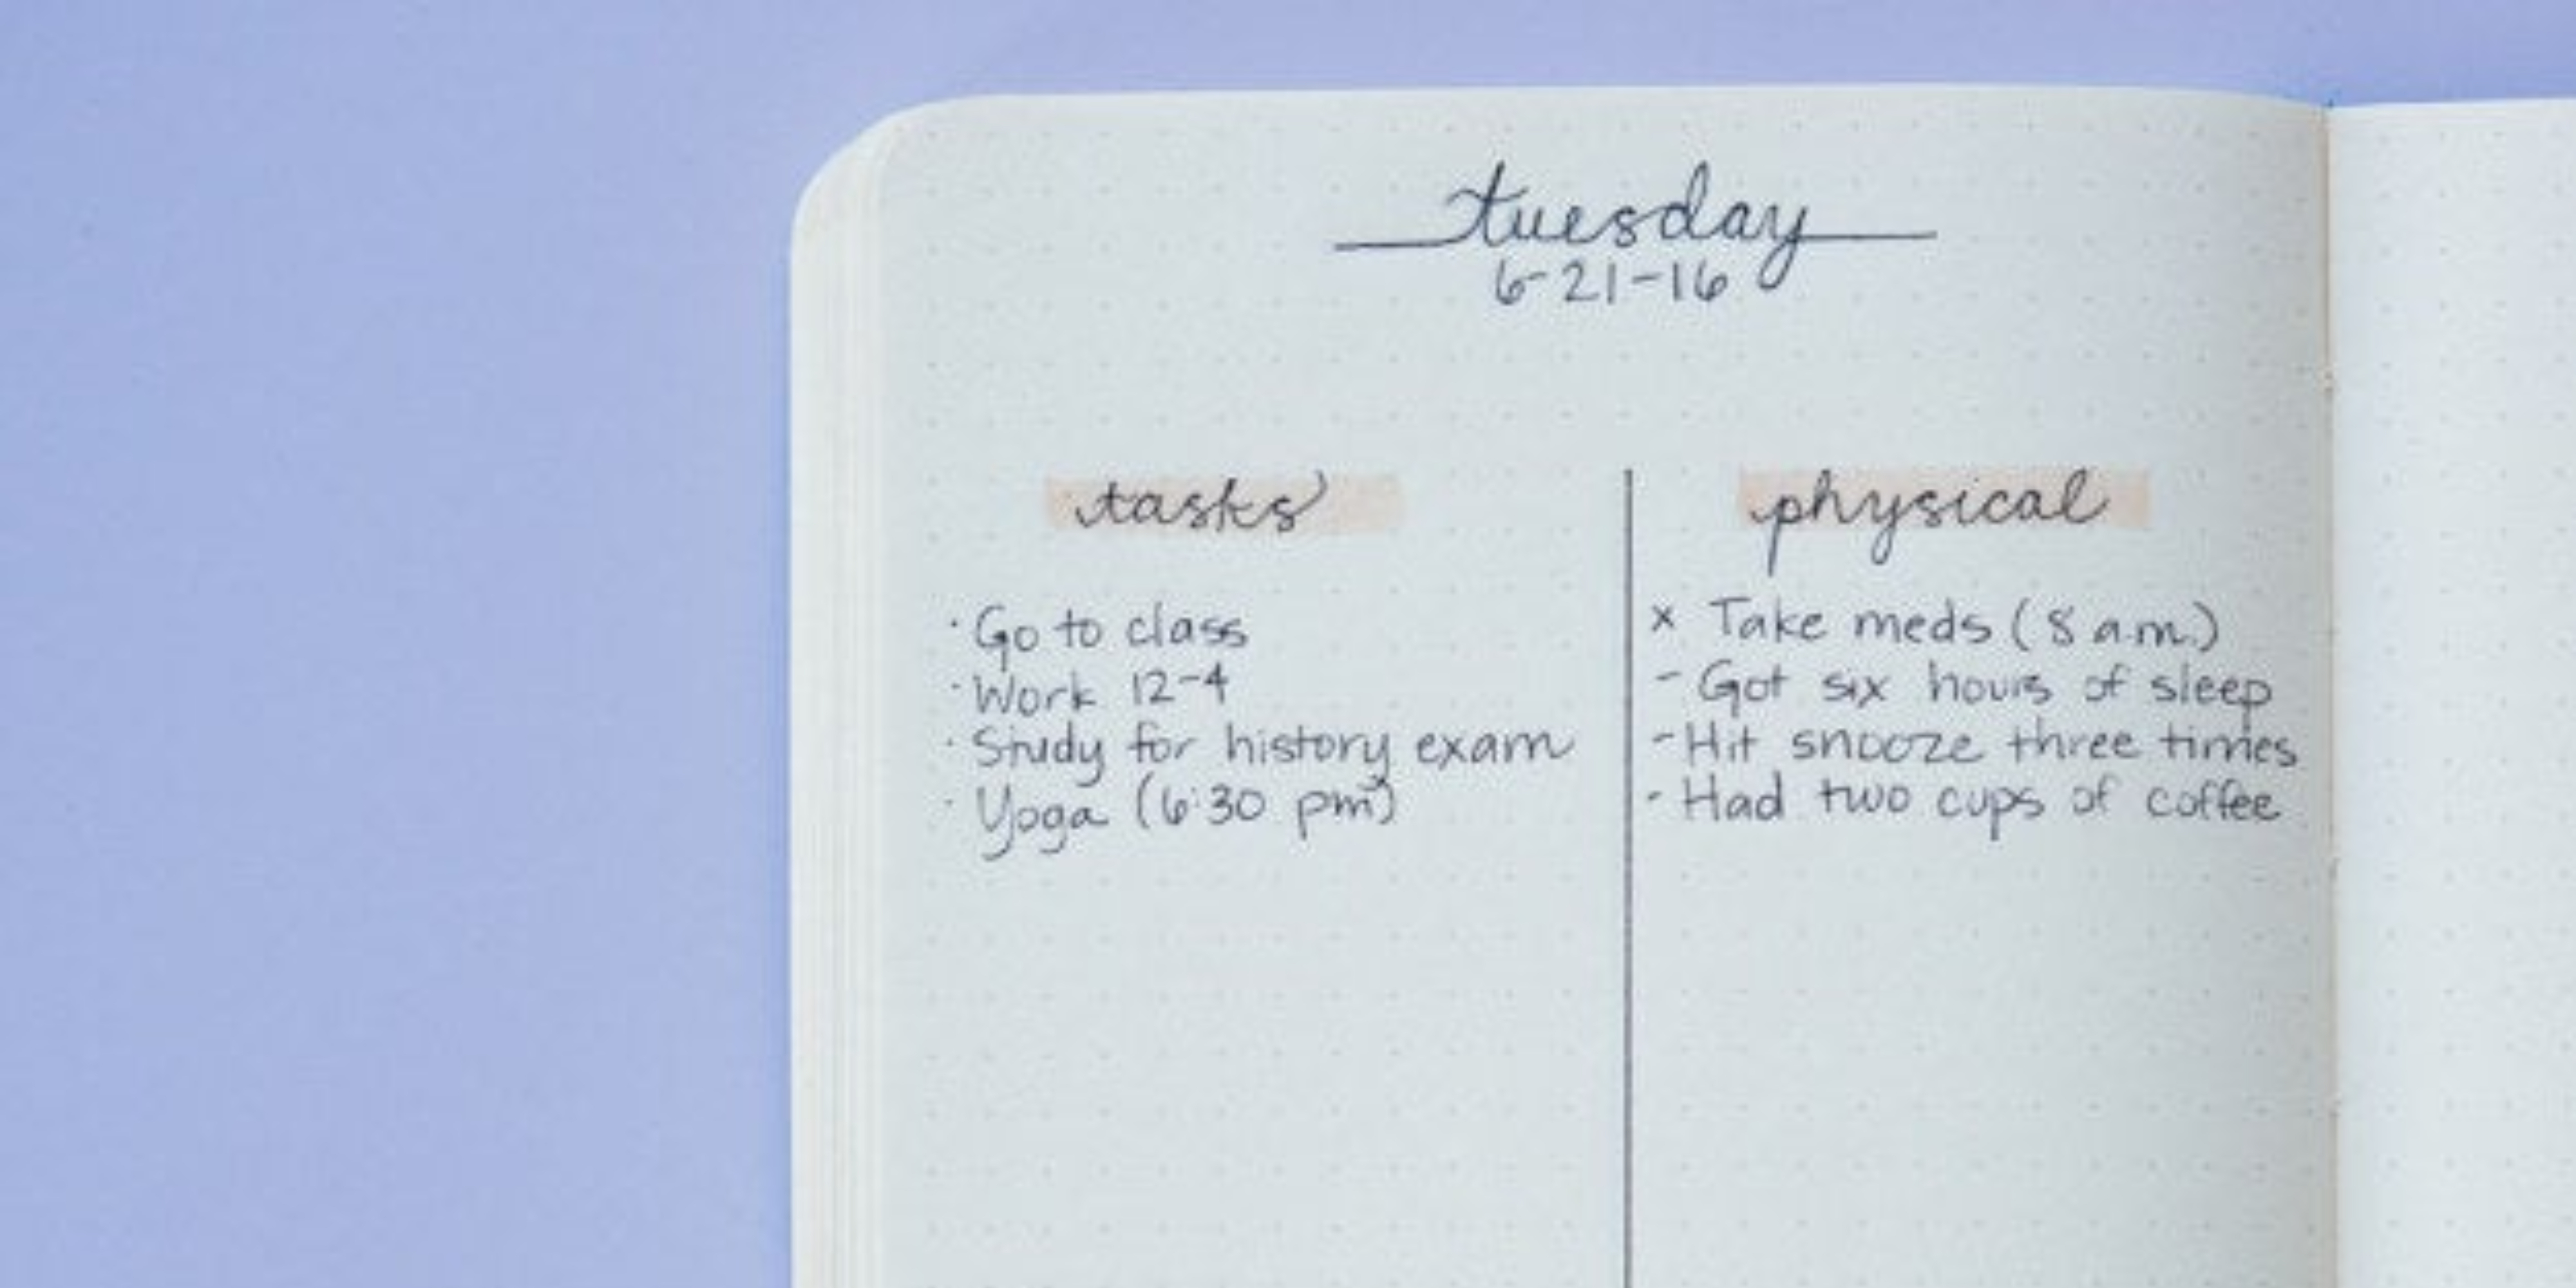 Genius Ways To Use Washi Tape In Your Bullet Journal - The Tiny Life